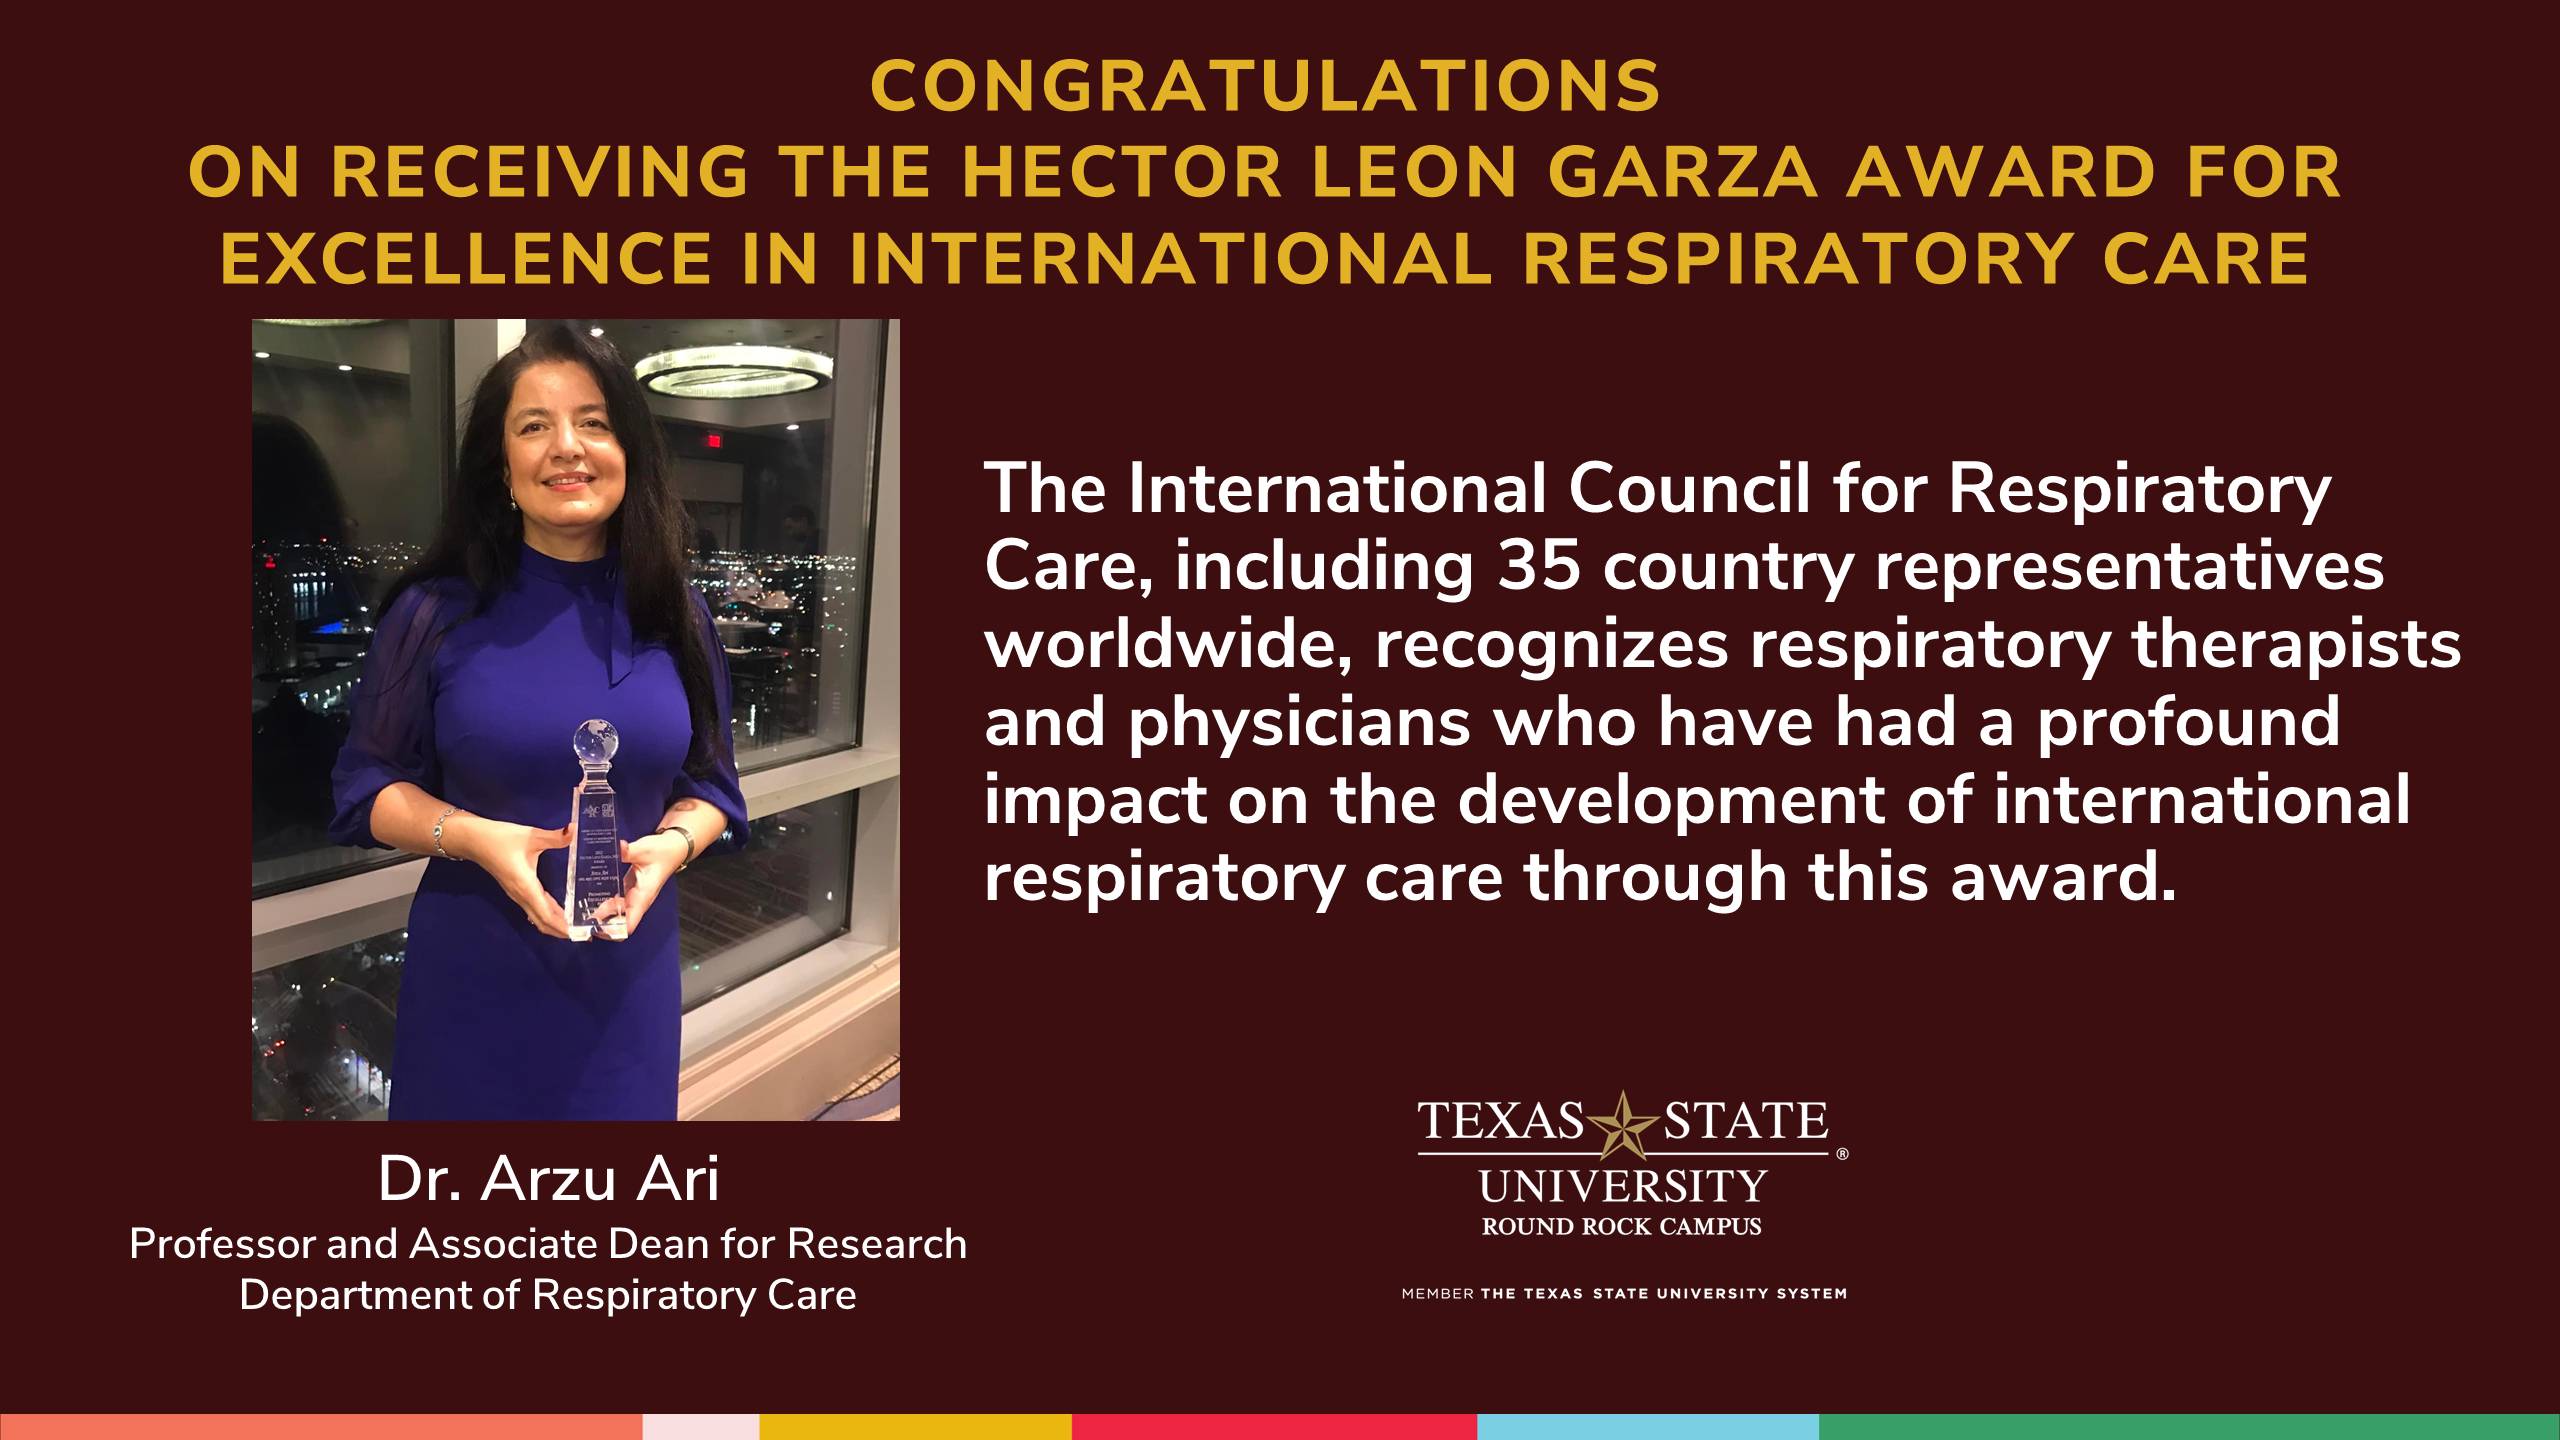 Dr. Arzu Ari receives the Hector Leon Garza award for excellence in international respiratory care.